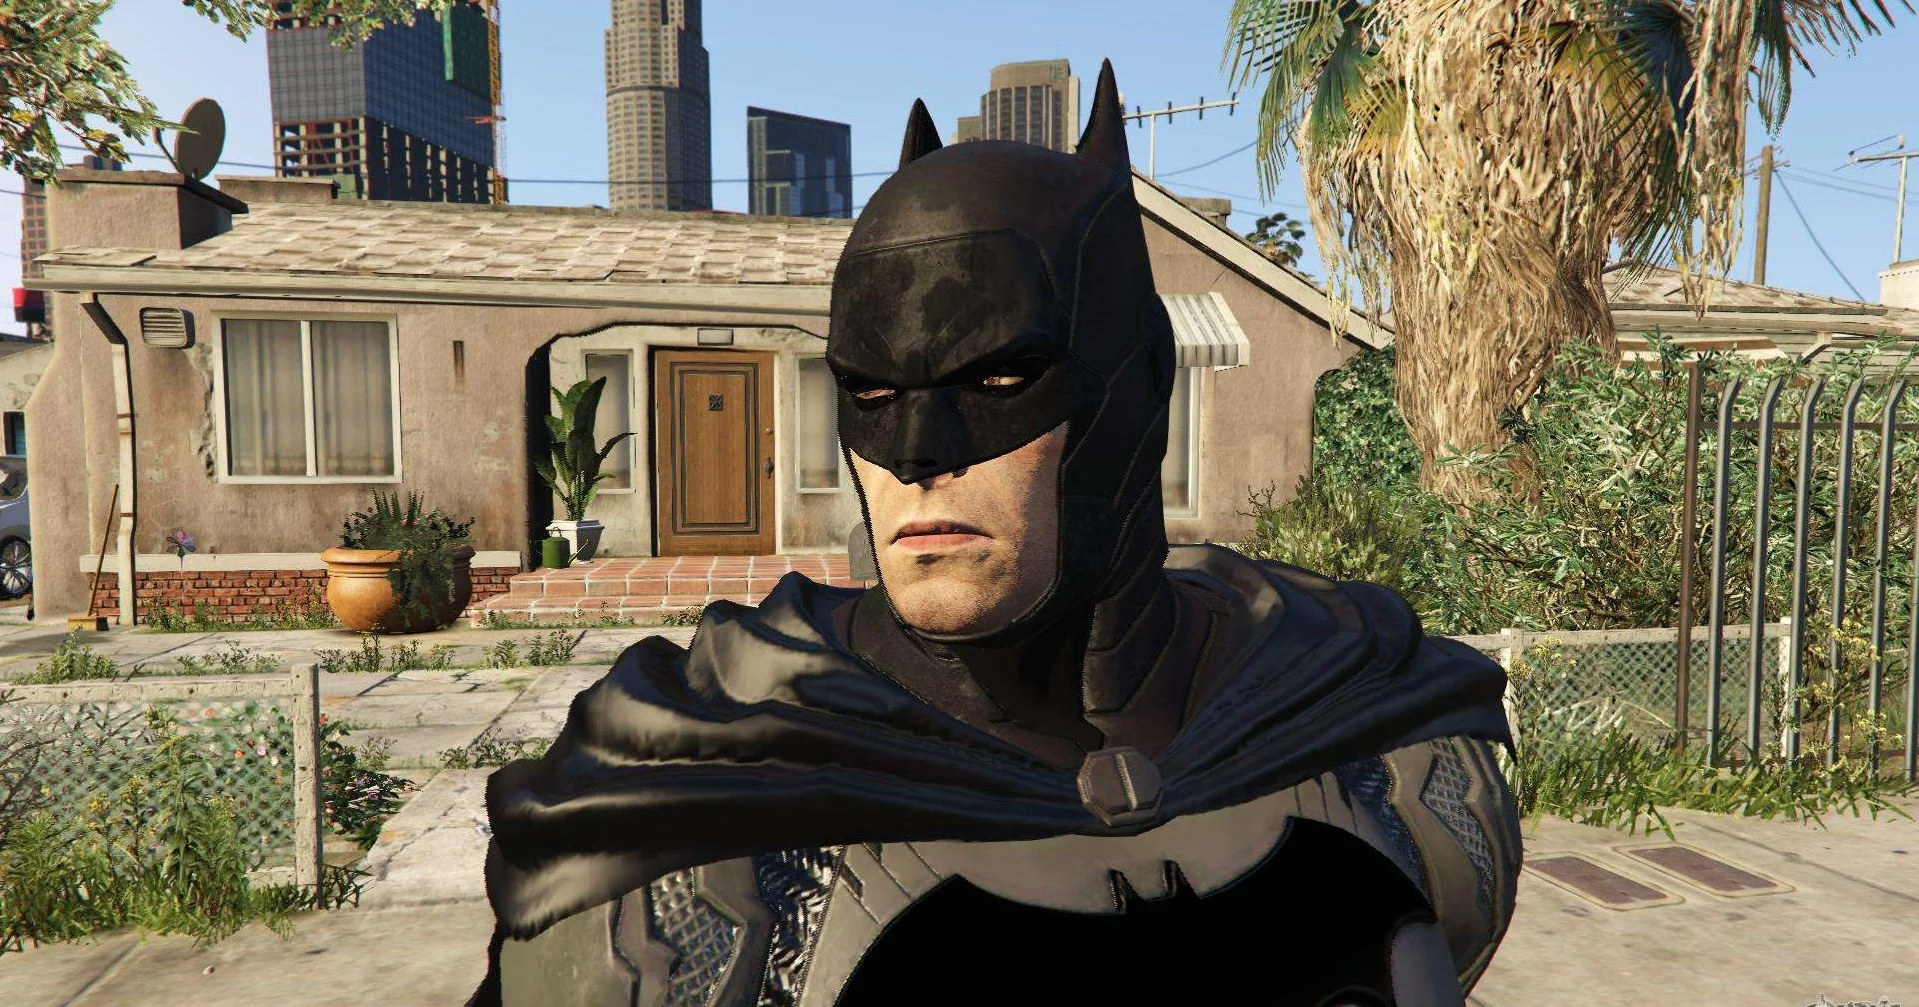 The neural network showed what DC superheroes would look like in the world of GTA